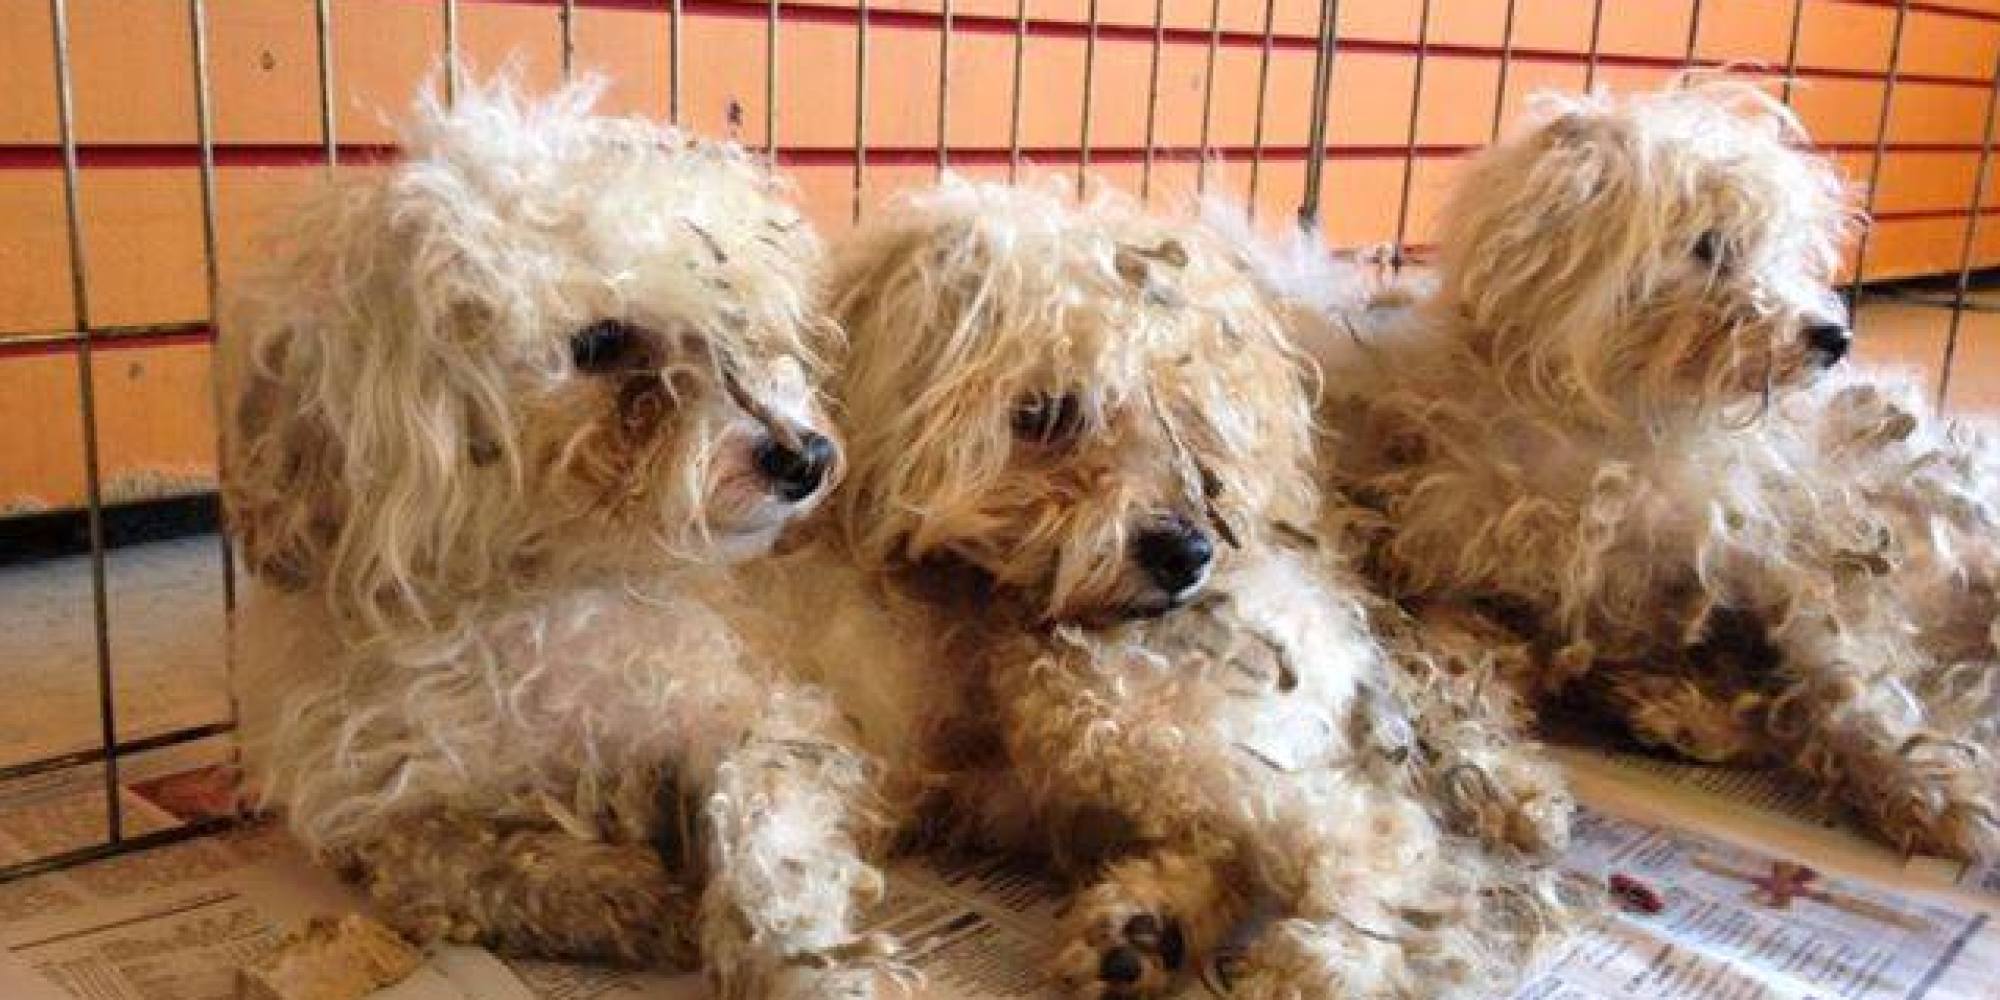 How Anyone Could Mistreat And Dump These Poodles Is Beyond Us | HuffPost